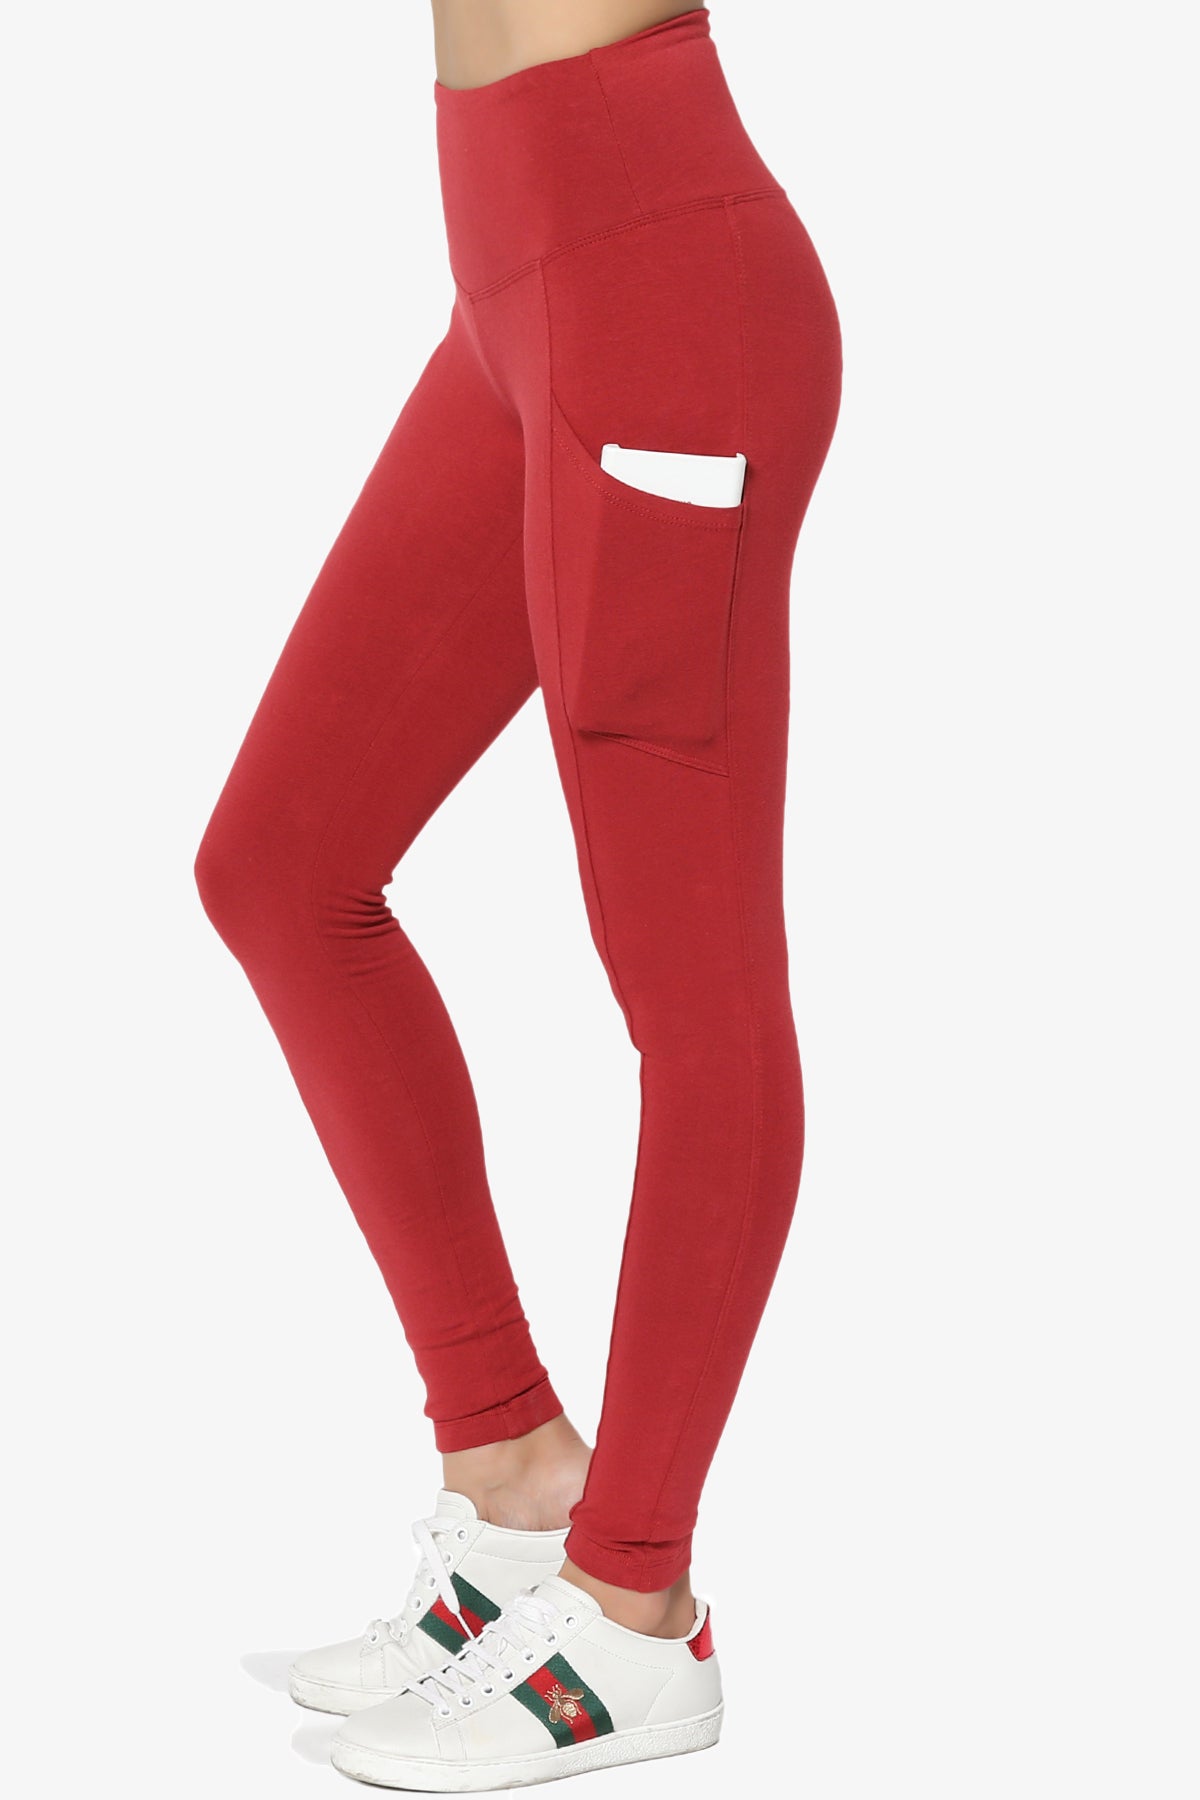 Ansley Luxe Cotton Leggings with Pockets DARK RED_1